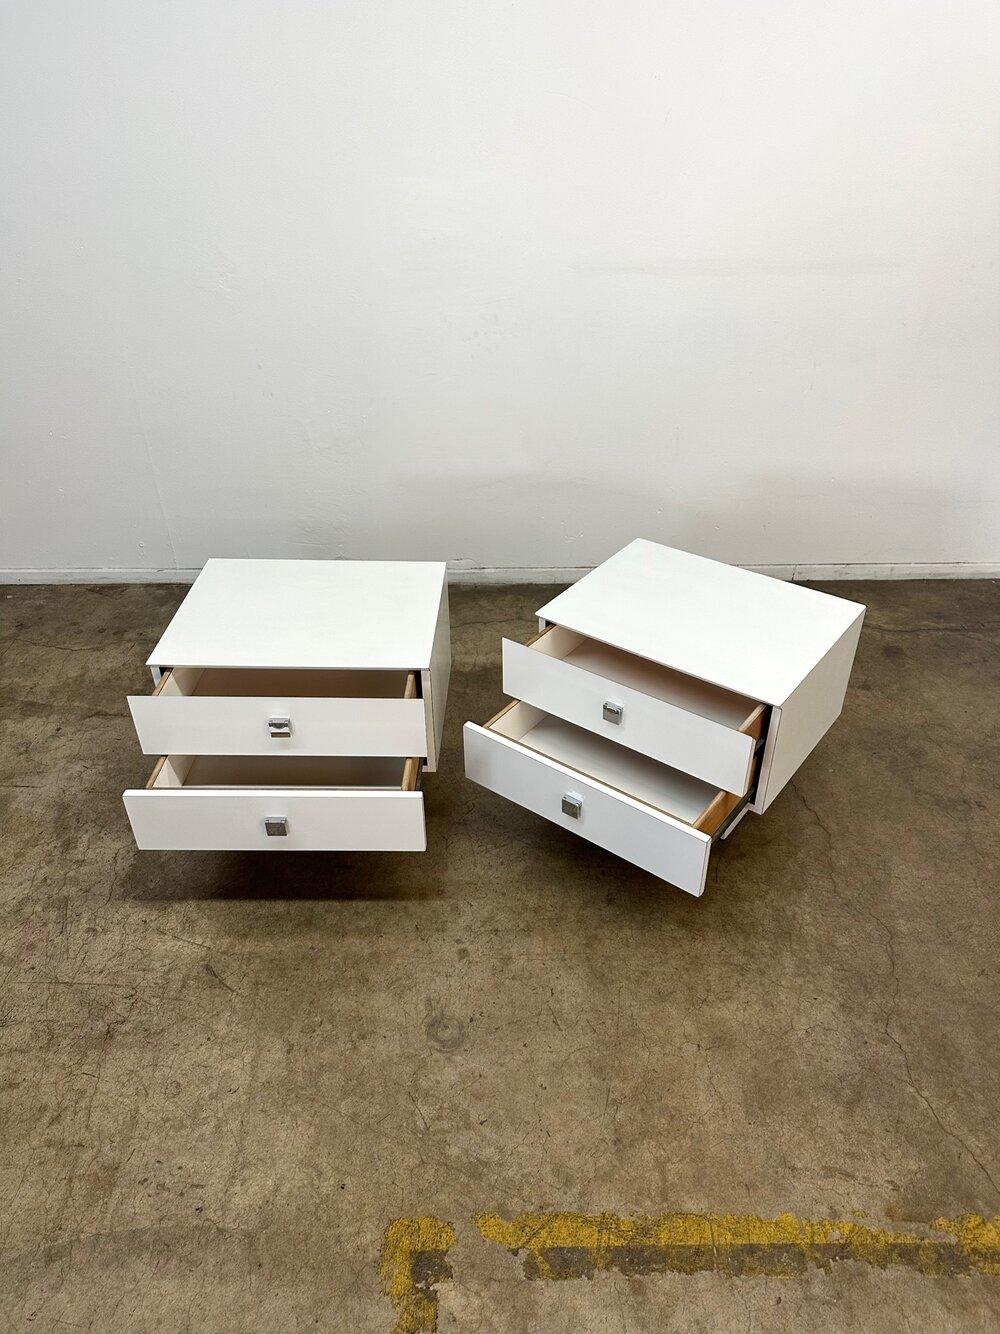 Dimensions: W23 D18 H20

Fully restored white lacquer nightstands. The pair is structurally sound and fully functional. Both units have original hardware and no areas of major wear. The price is for the pair.